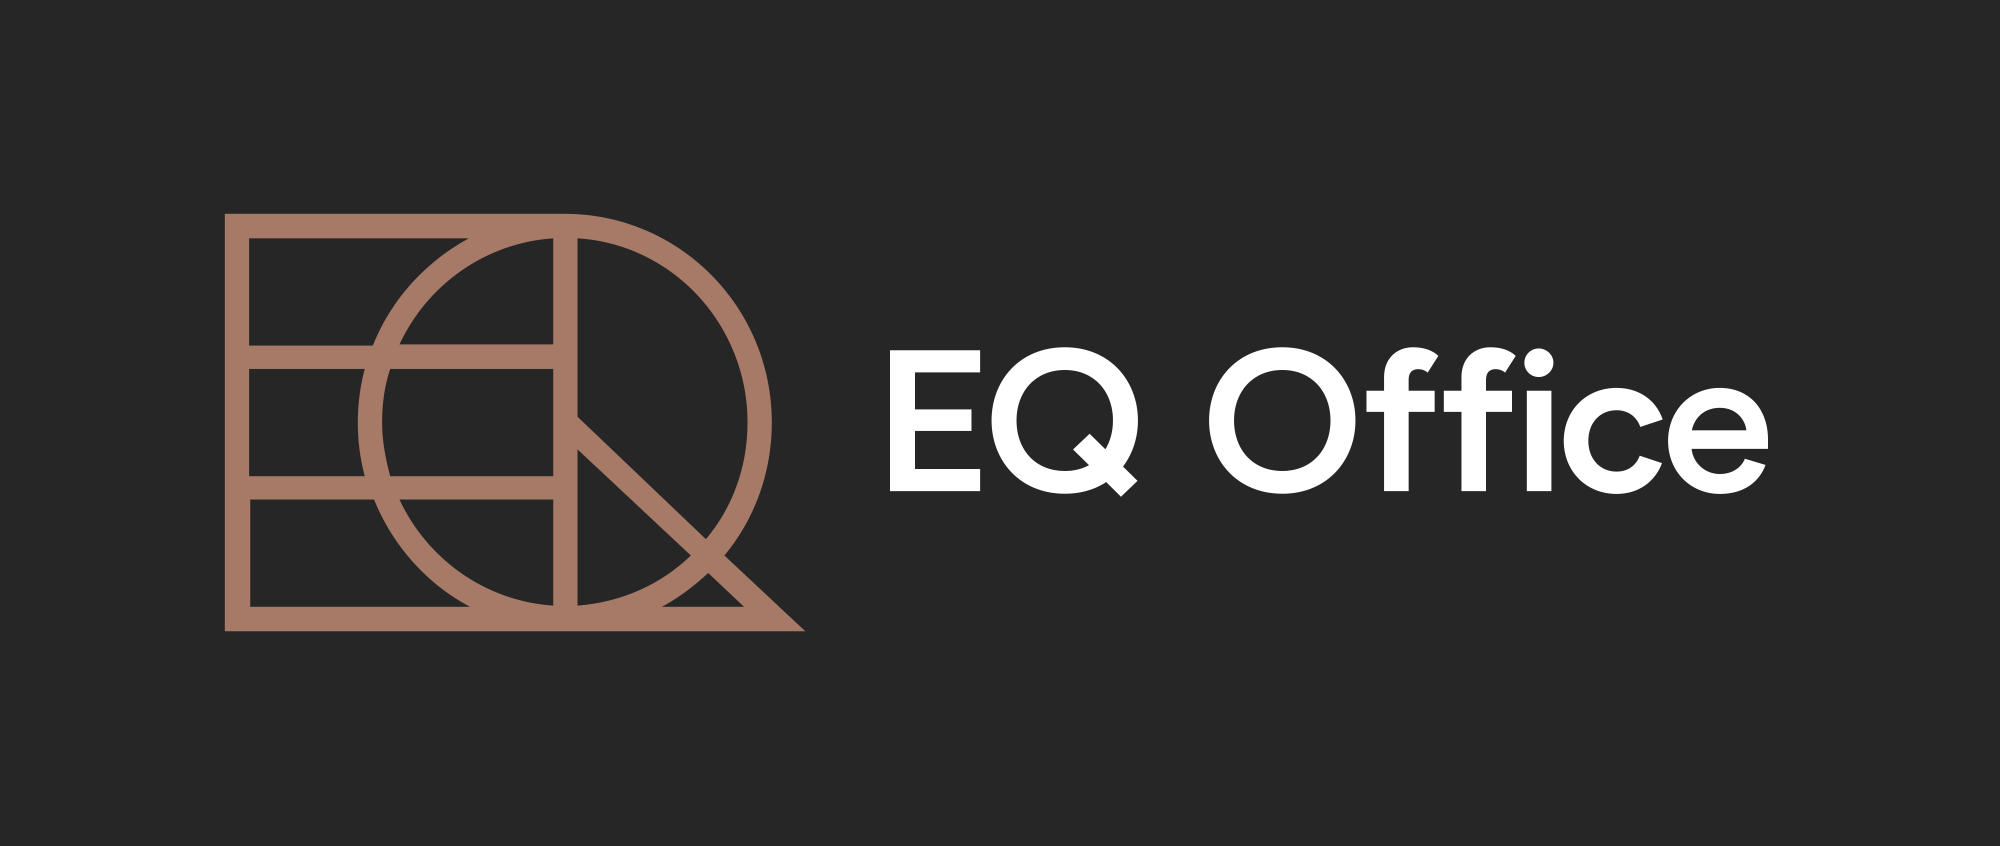 EQ Logo - Brand New: New Logo and Identity for EQ Office